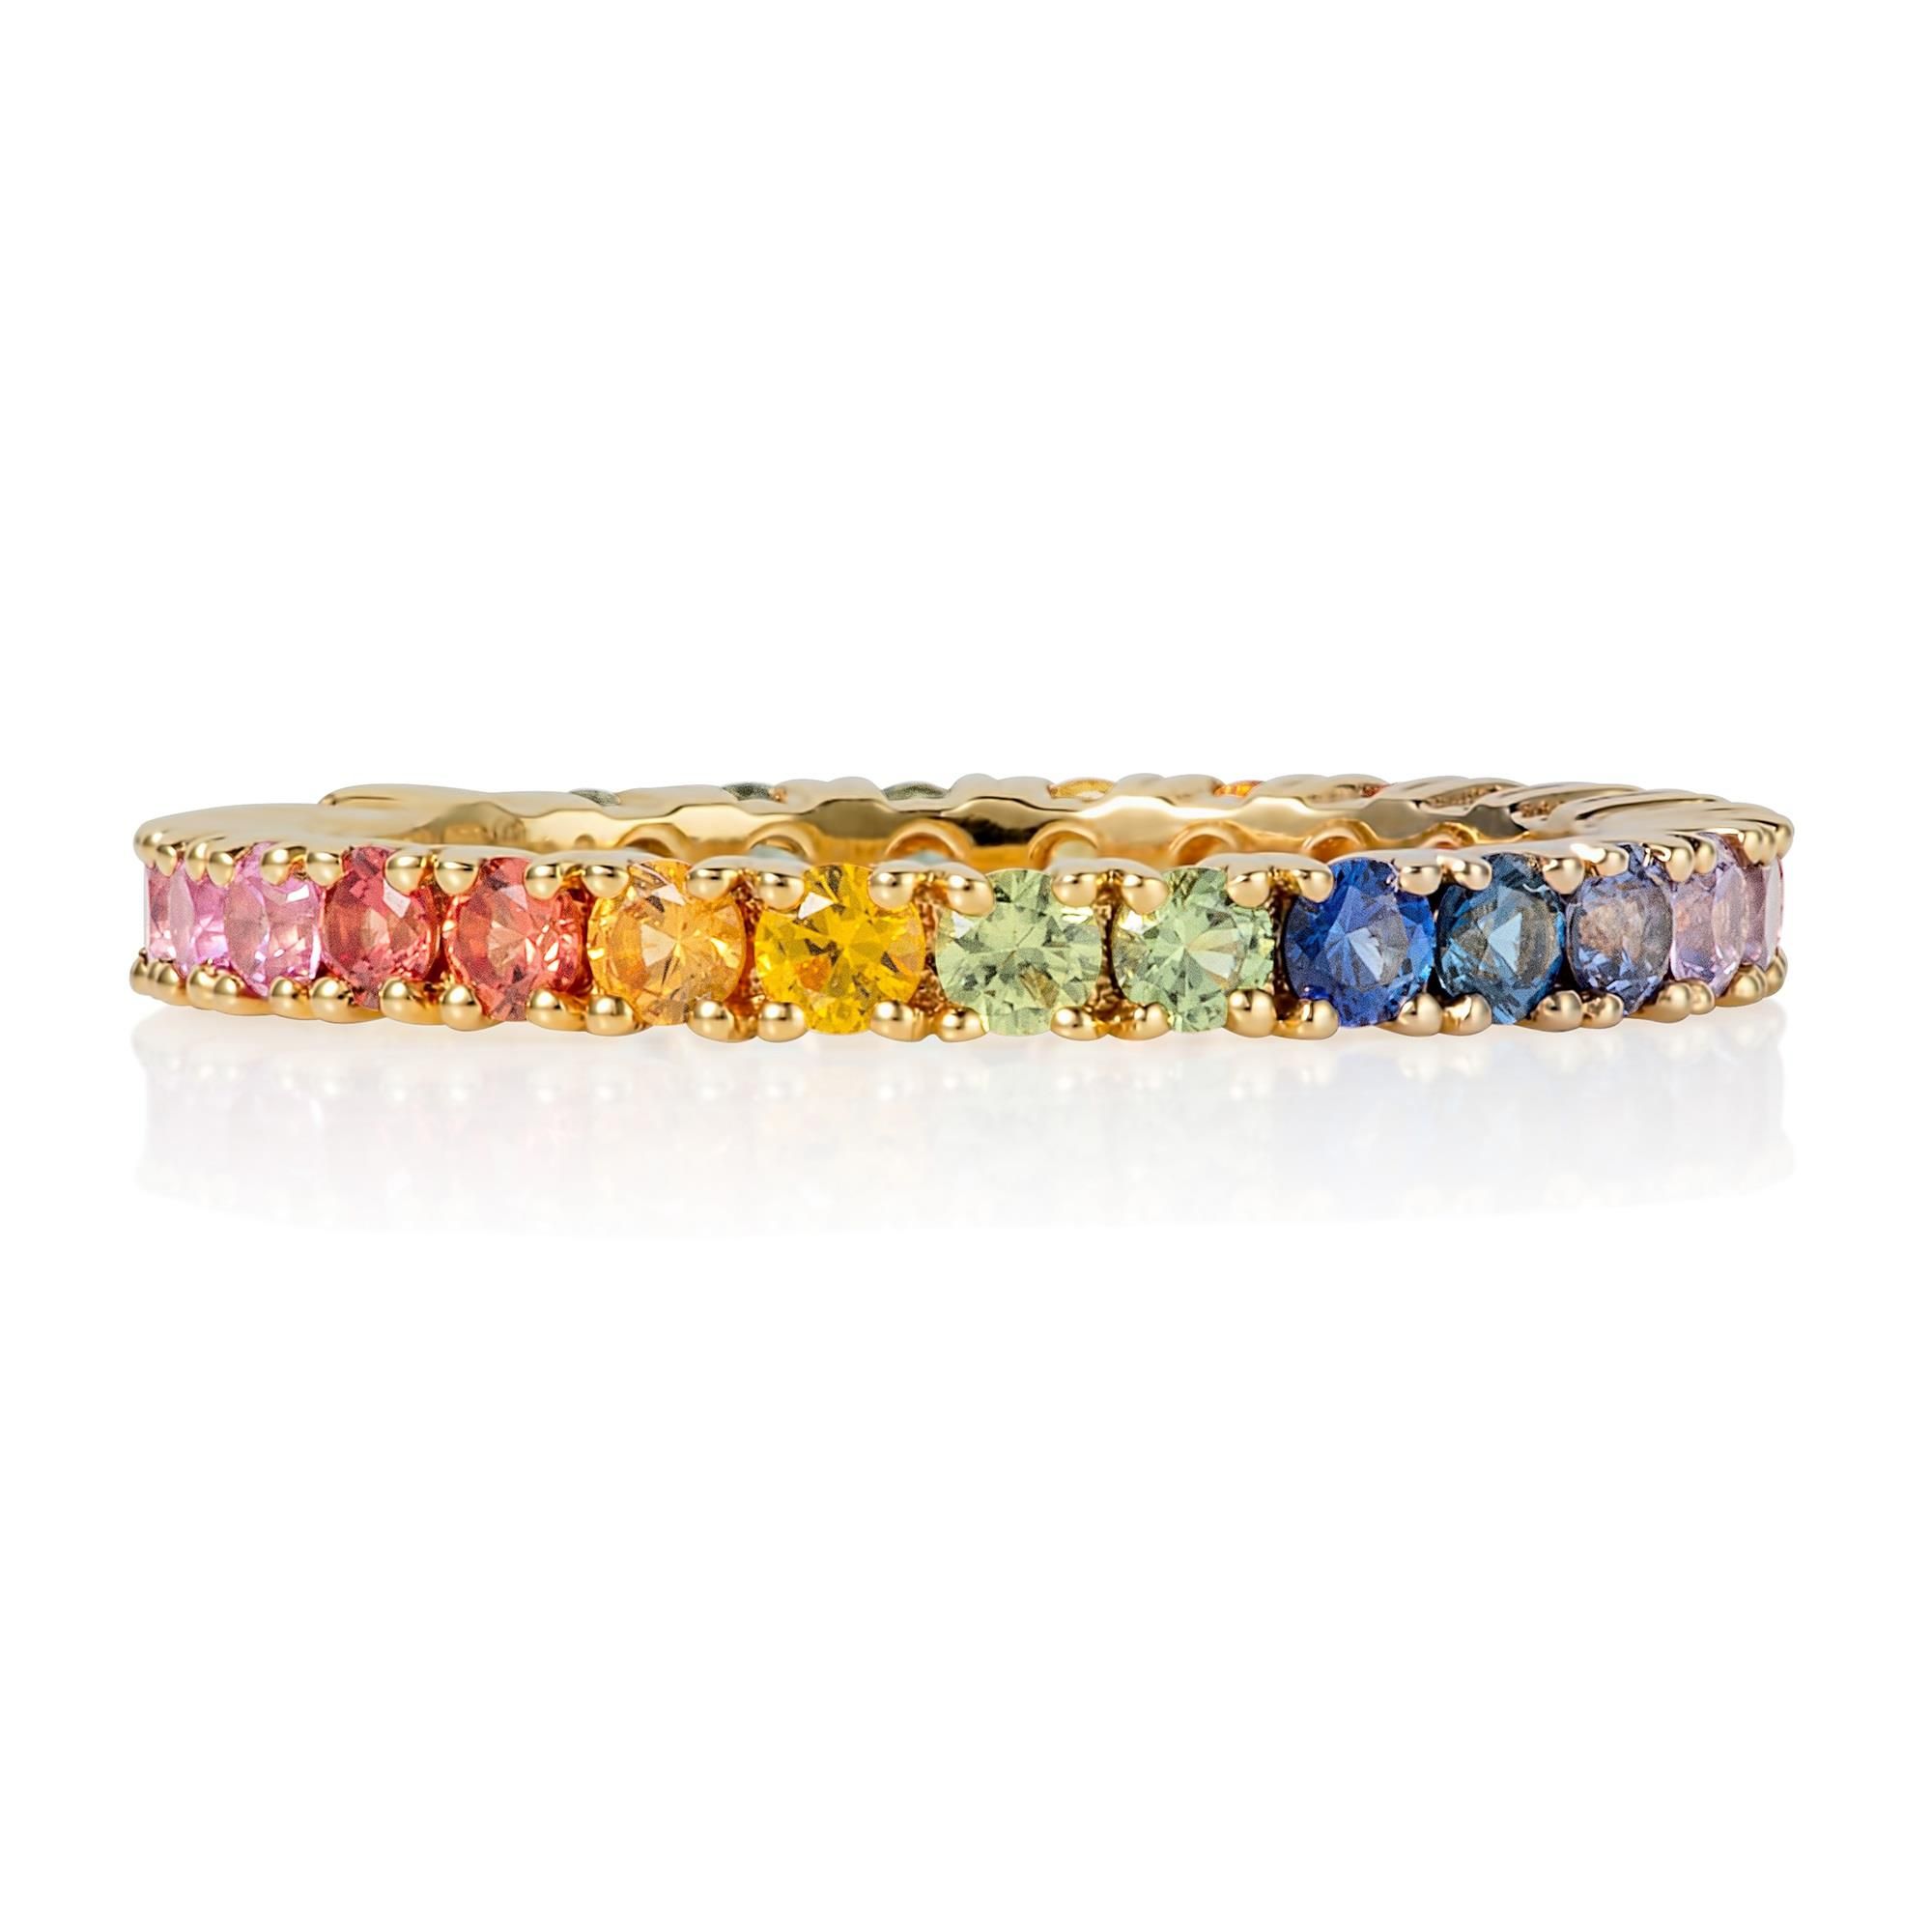 Samba Rainbow Sapphire Eternity Ring | Pravins Intended For Rainbow Sapphire Stack Bands Rings (View 21 of 25)